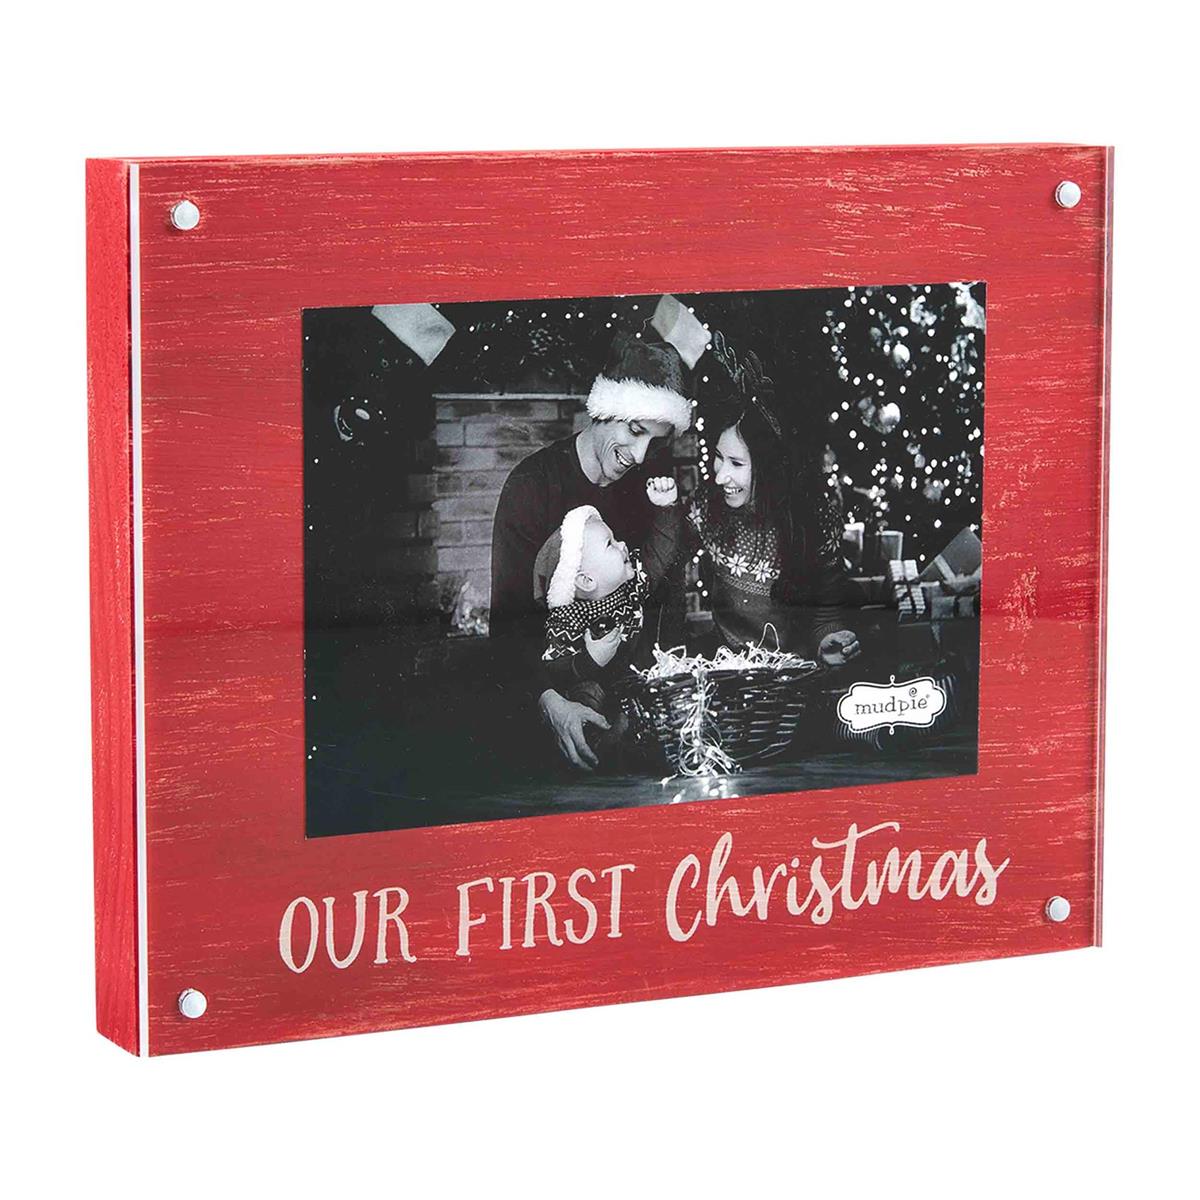 Our First Christmas Magnetic Block Frame from Mud Pie.